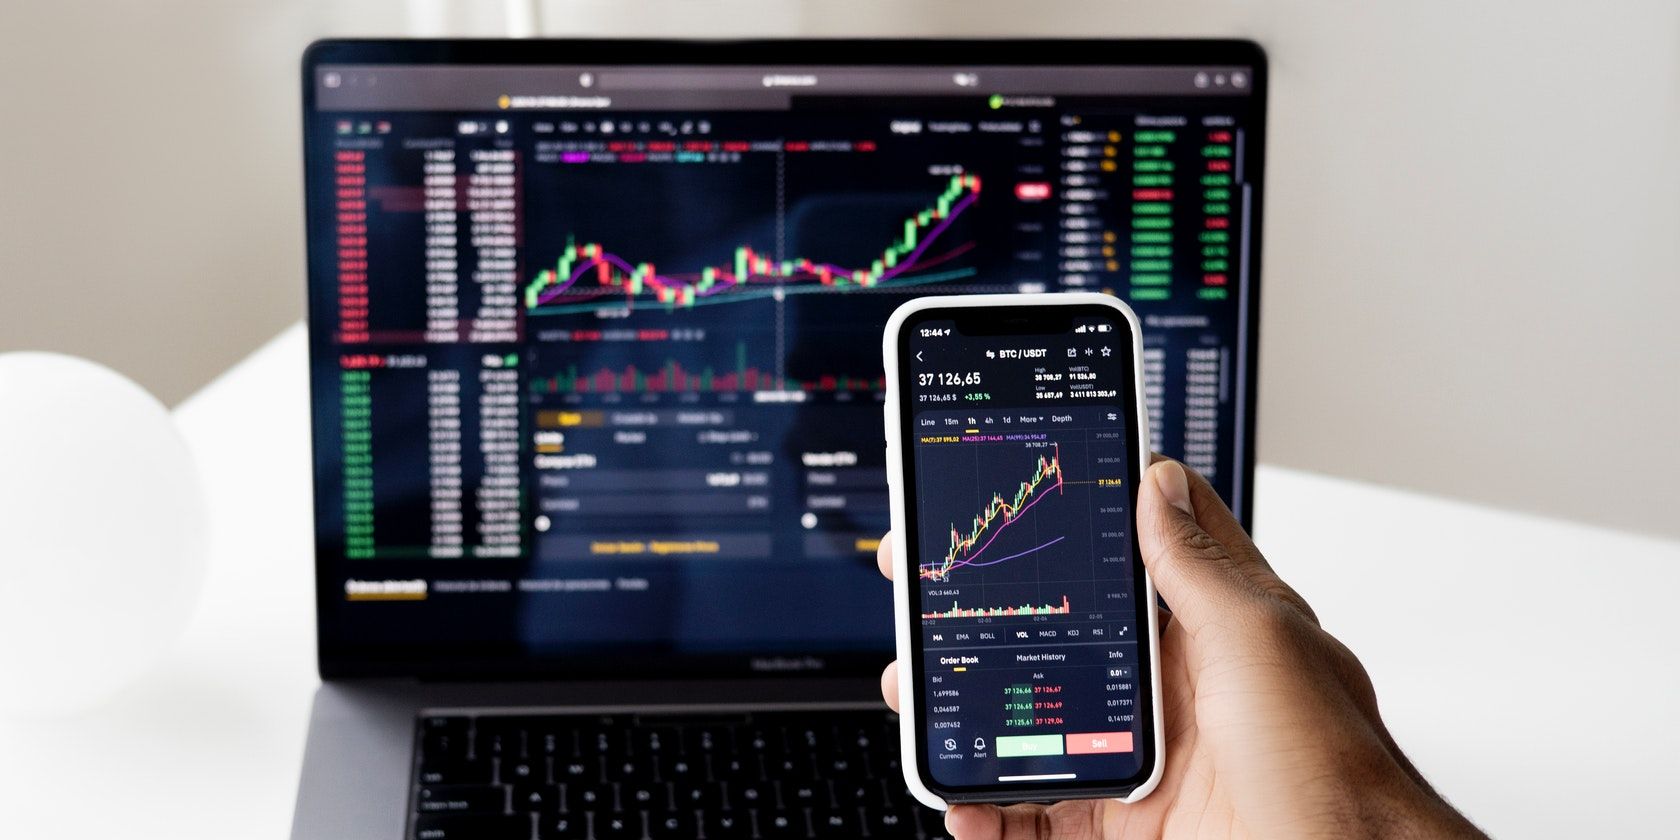 Pexels stock image of a laptop and a smartphone with stock market charts on the screens